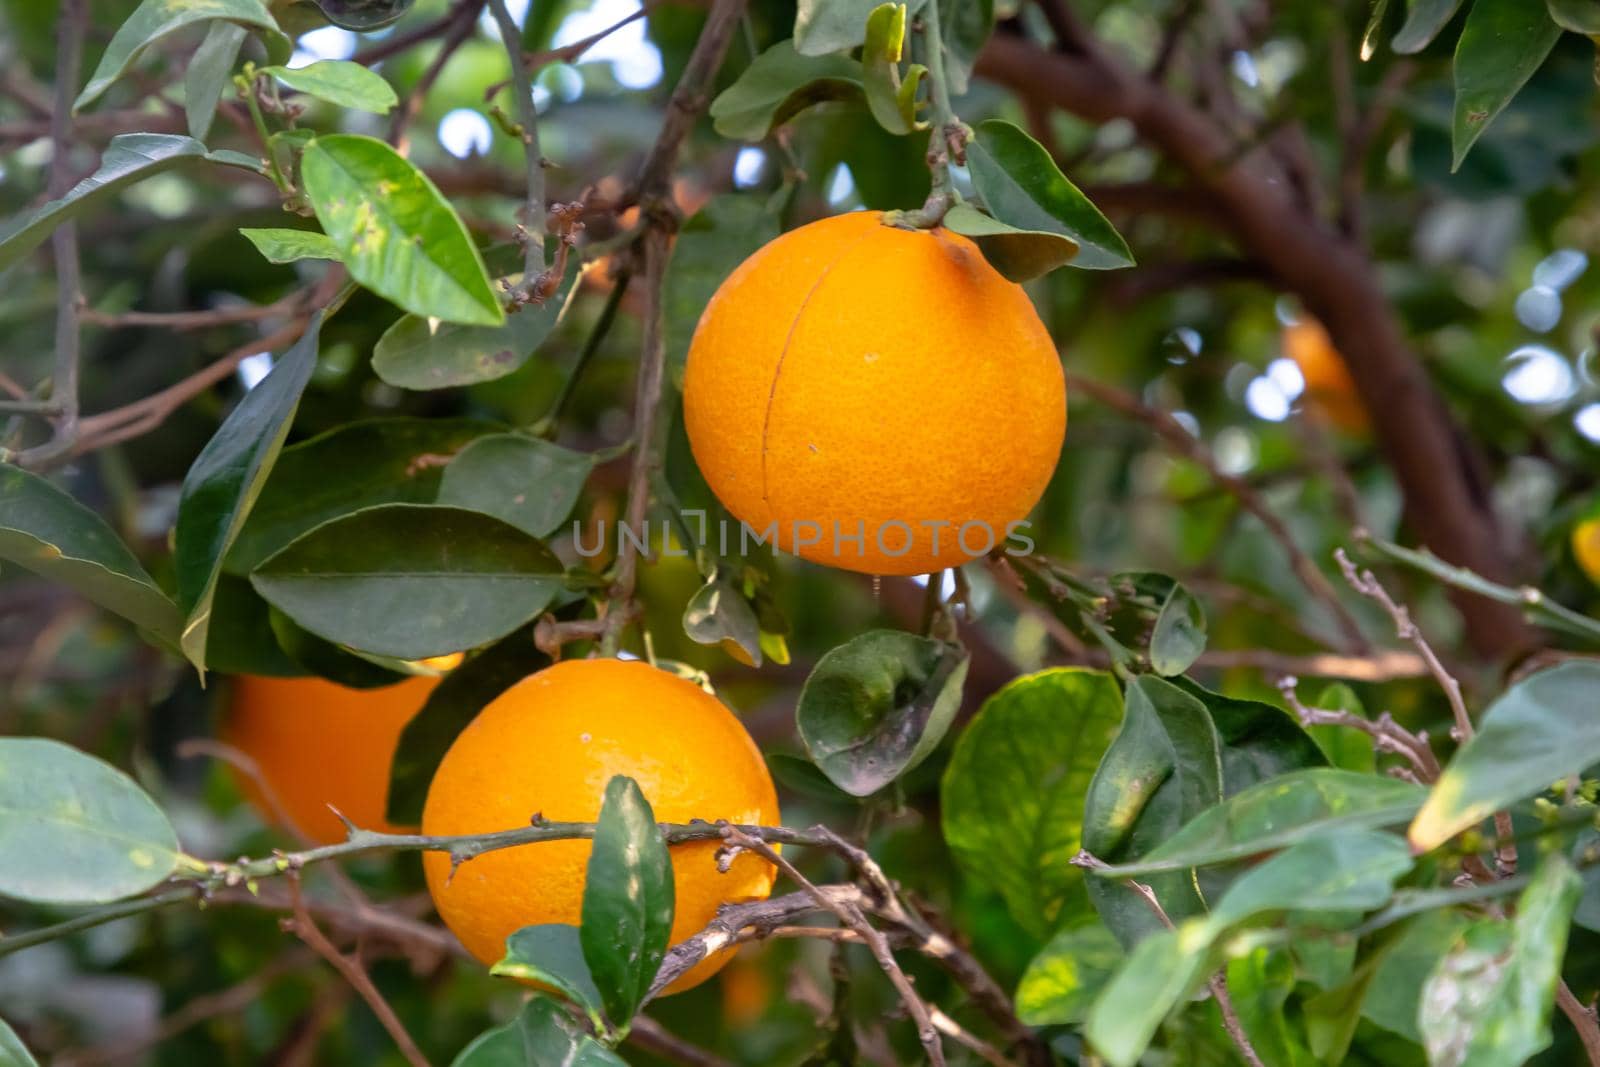 Ripe oranges grow on a tree among the foliage by Milanchikov